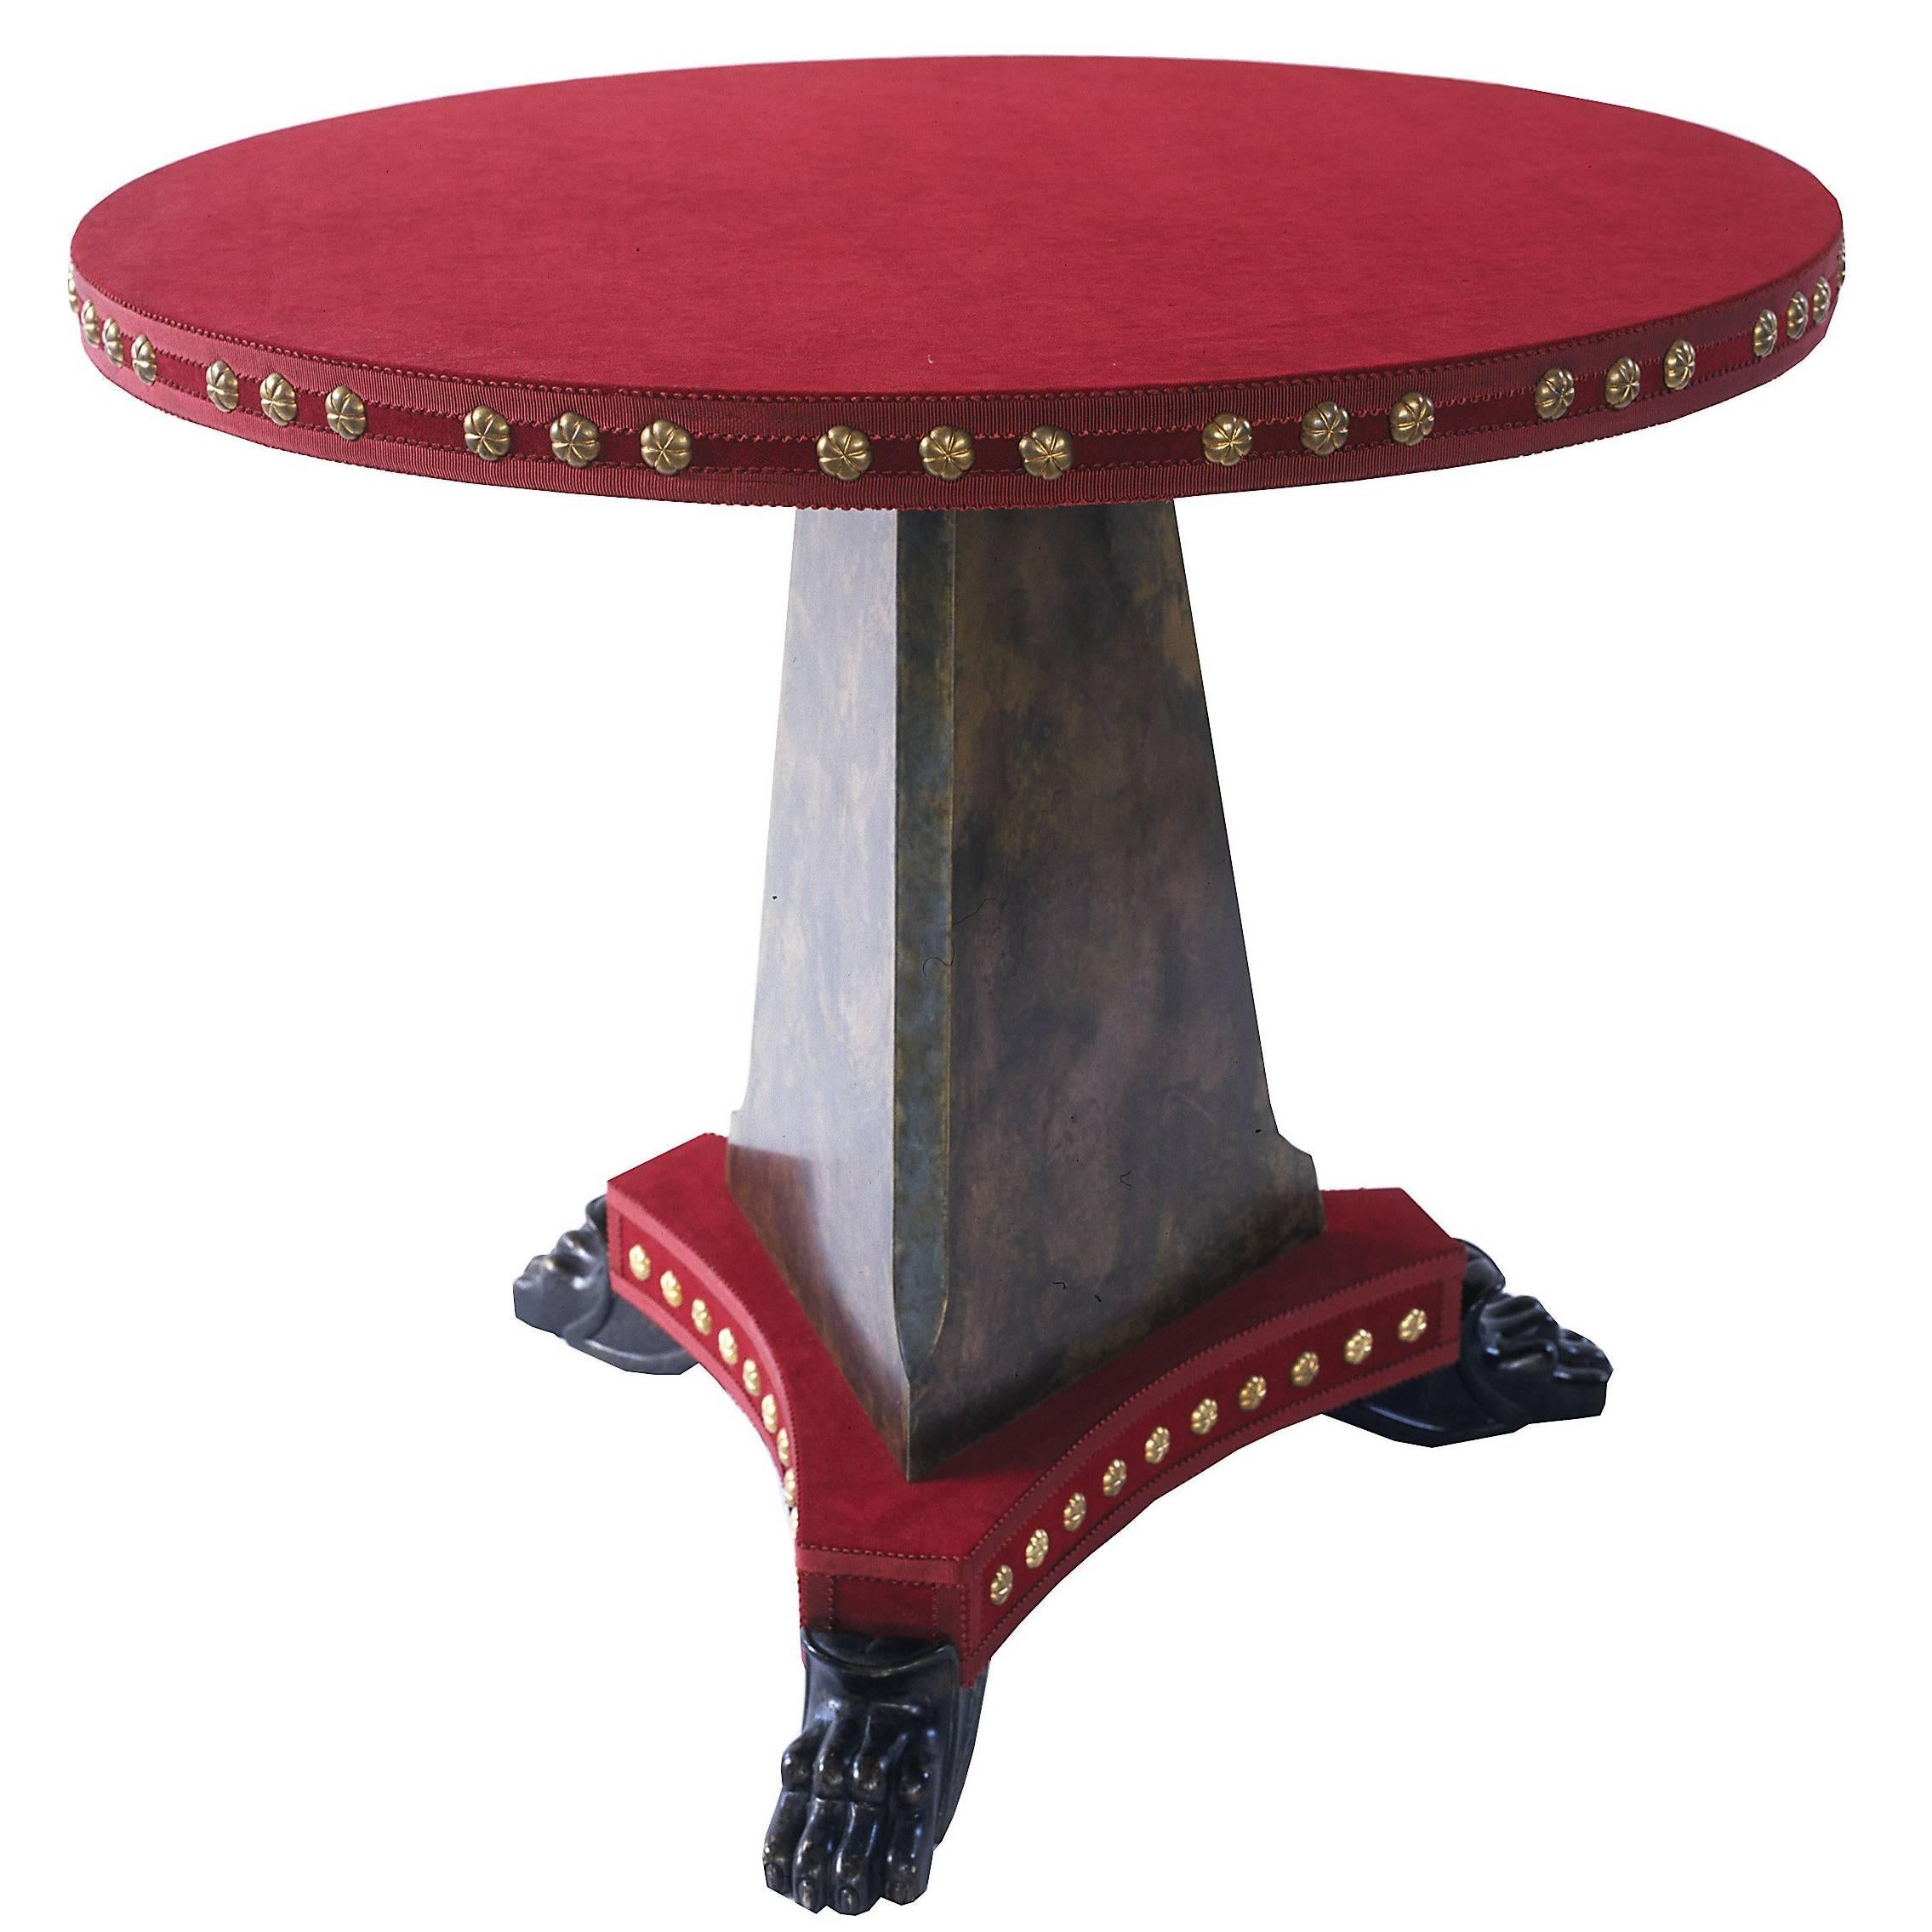 Tiberius Velvet Covered Pedestal Table with Bronzed Base For Sale